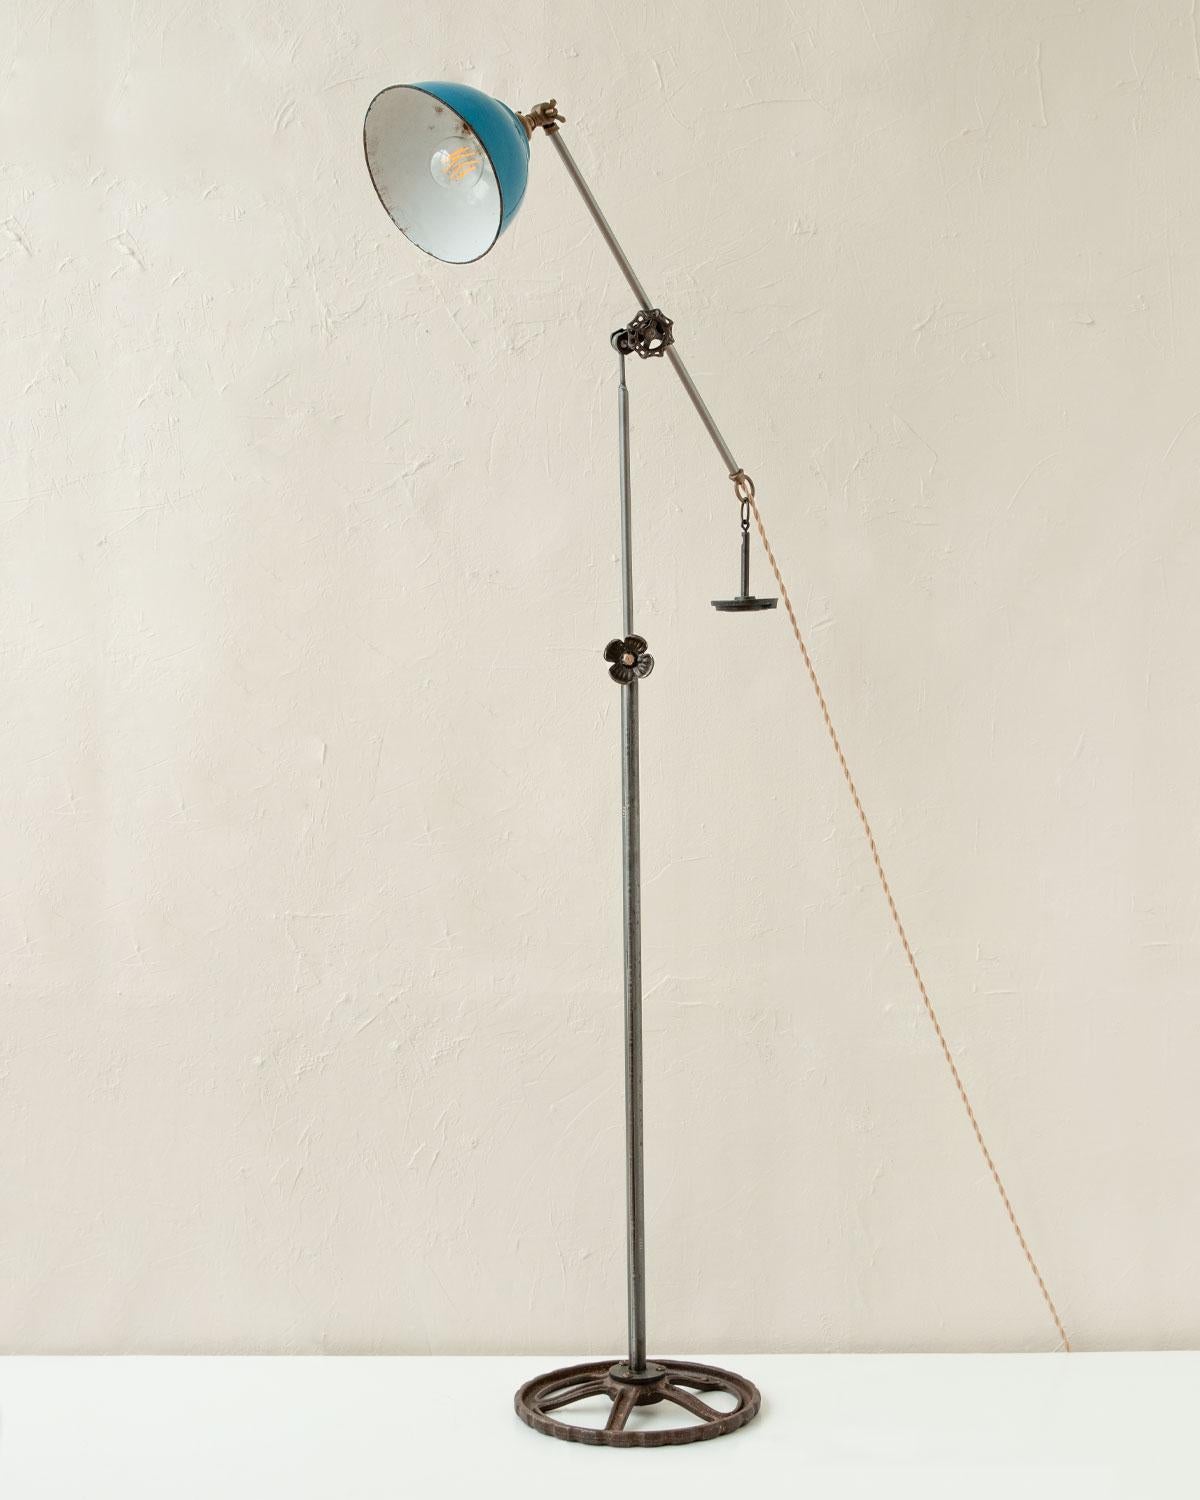 Robert True Ogden's one-of-a-like Found Object Lamps are made by hand in Philadelphia. Crafted from pieces and parts sourced locally and abroad, no two lamps are alike. 

This floor lamp has a vintage blue enamel shade, vintage gears that lock the